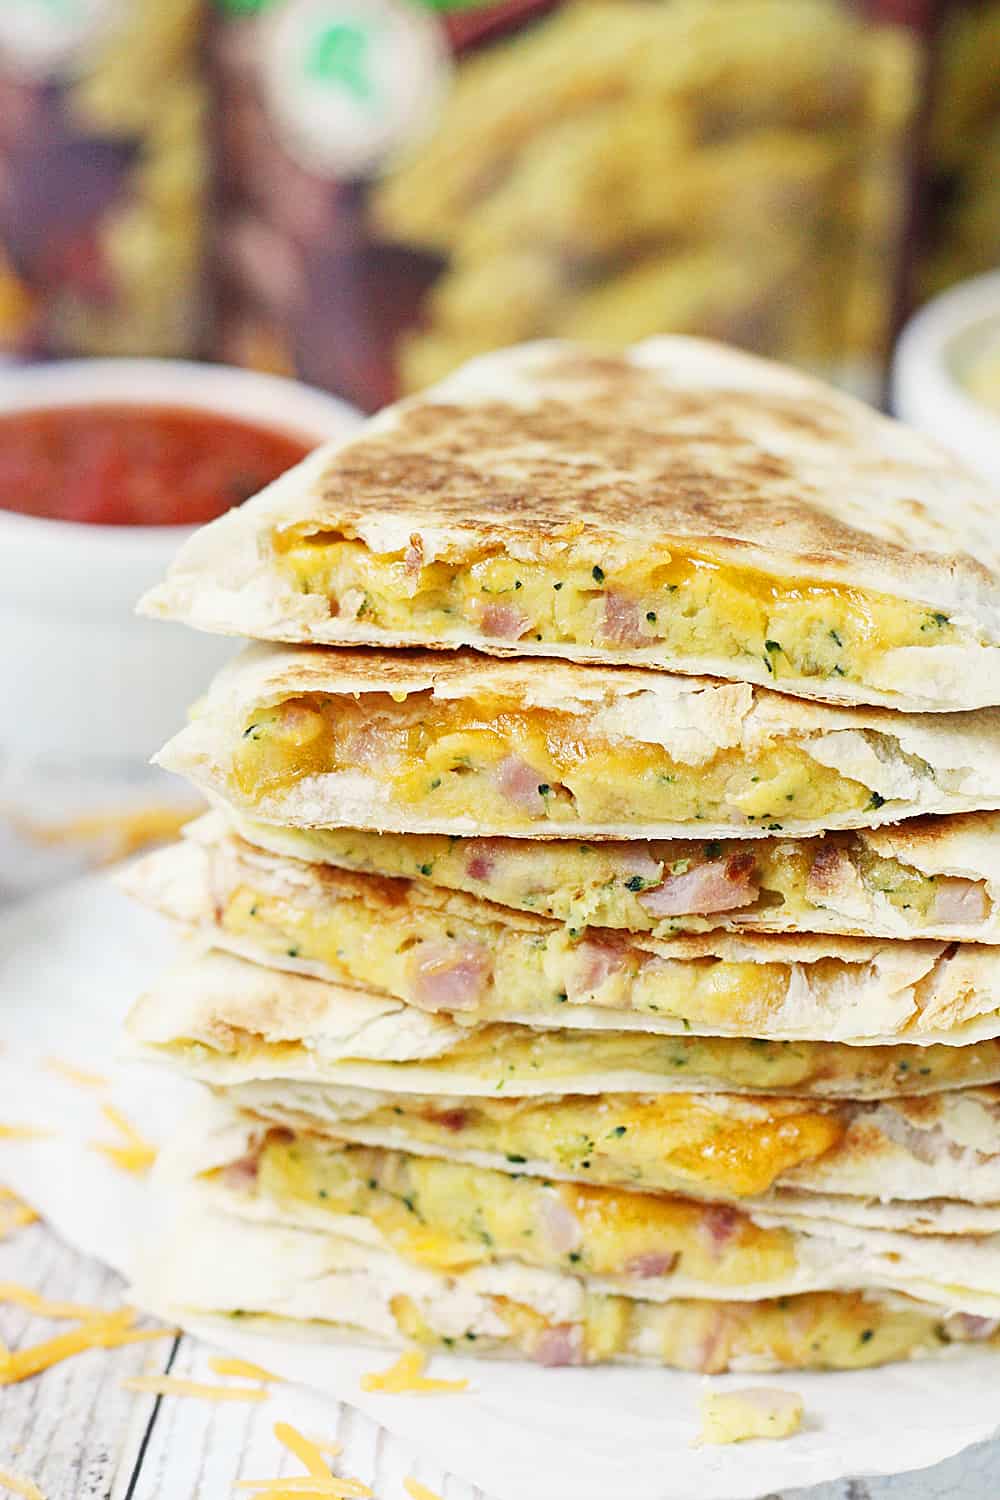 5-Minute Broccoli Ham & Cheese Quesadilla -- Love a simple weeknight meal idea! These quesadillas are quick and easy and a great way to get your family to eat extra veggies!